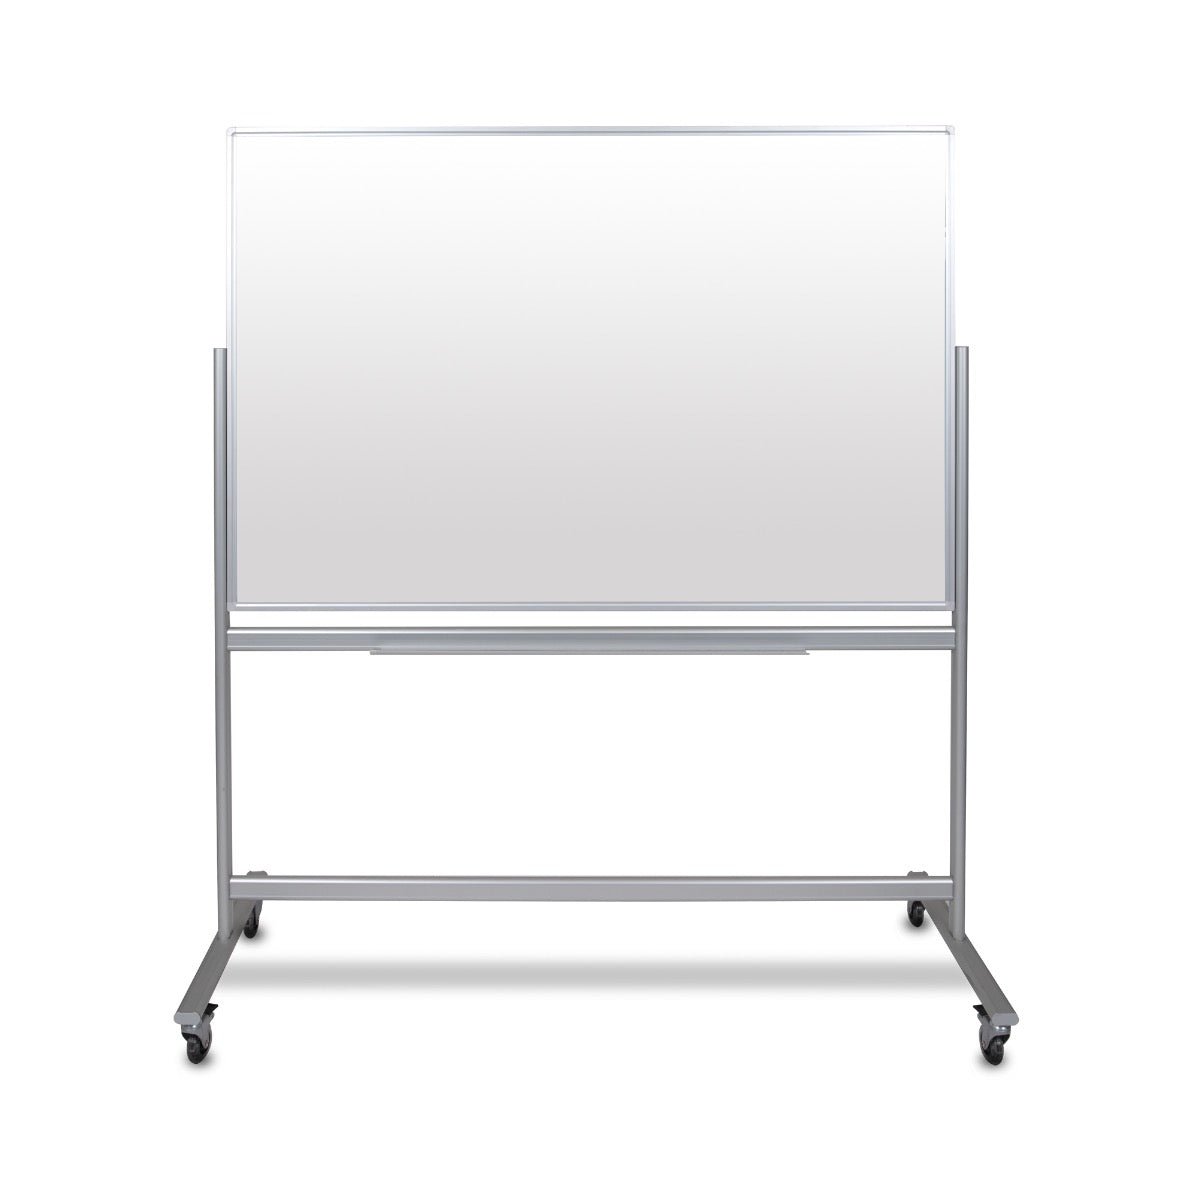 Luxor MMGB6040 - Double-Sided Mobile Magnetic Glass Marker Board - 60"W x 40"H (LUX-MMGB6040) - SchoolOutlet